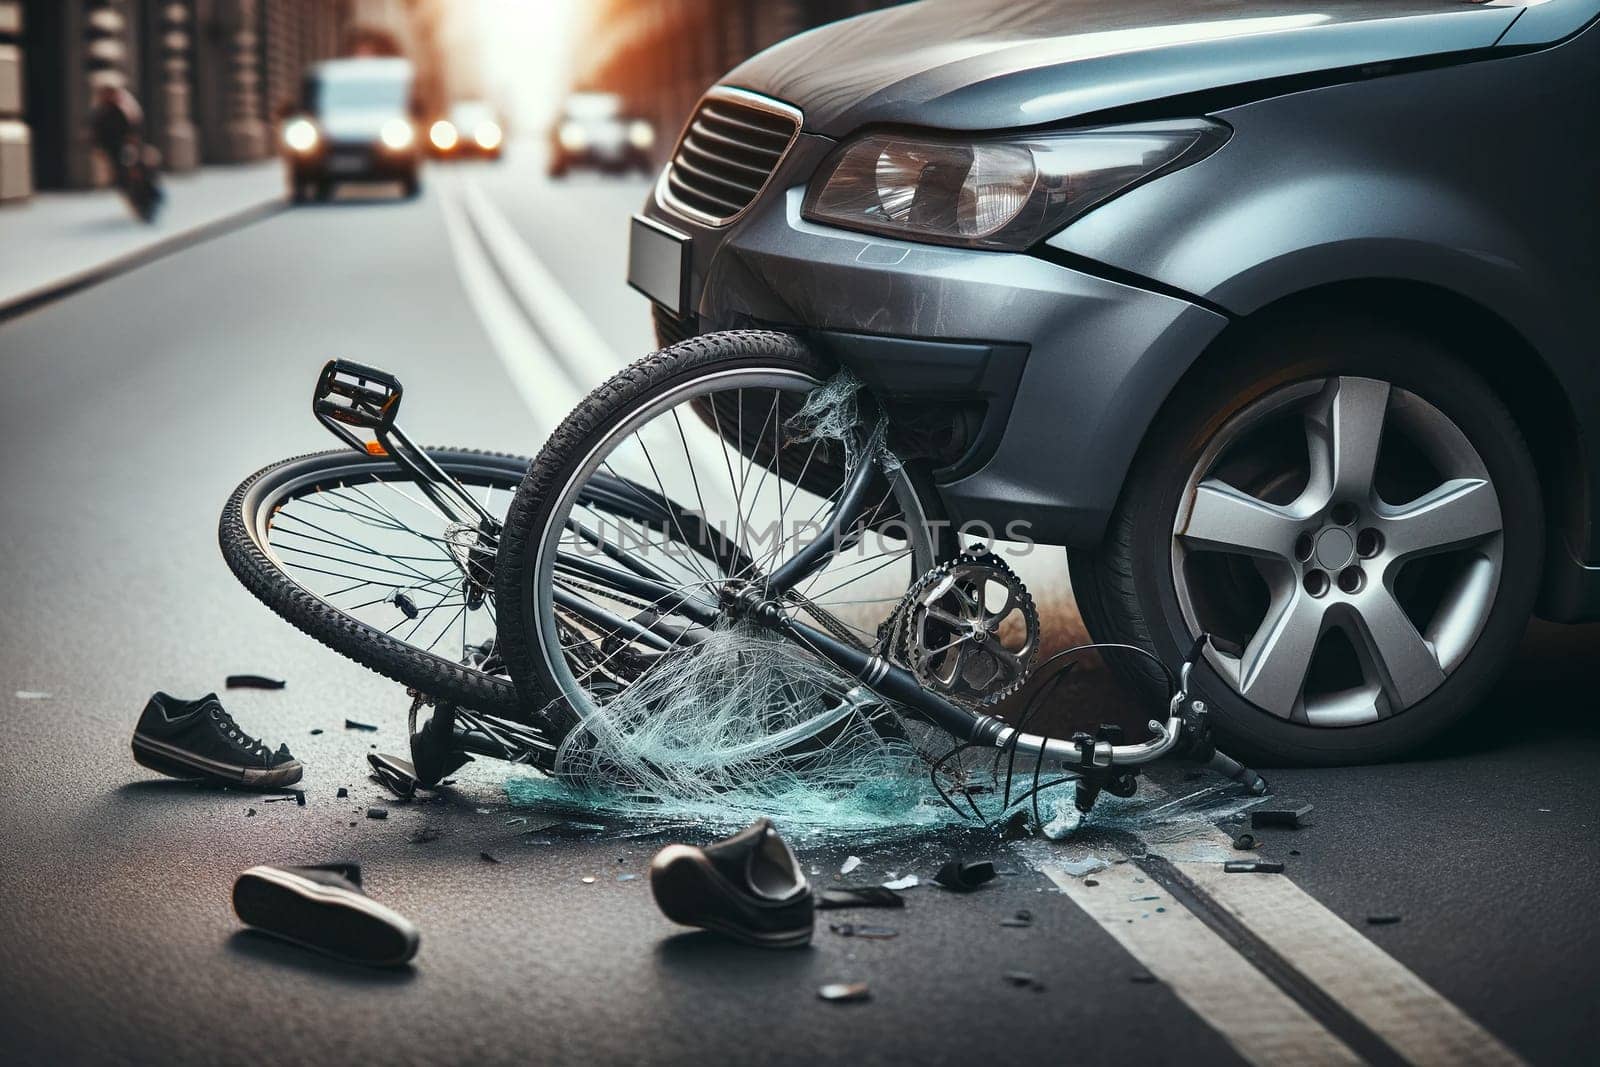 road accident scene with bicycle and car collision by Annado